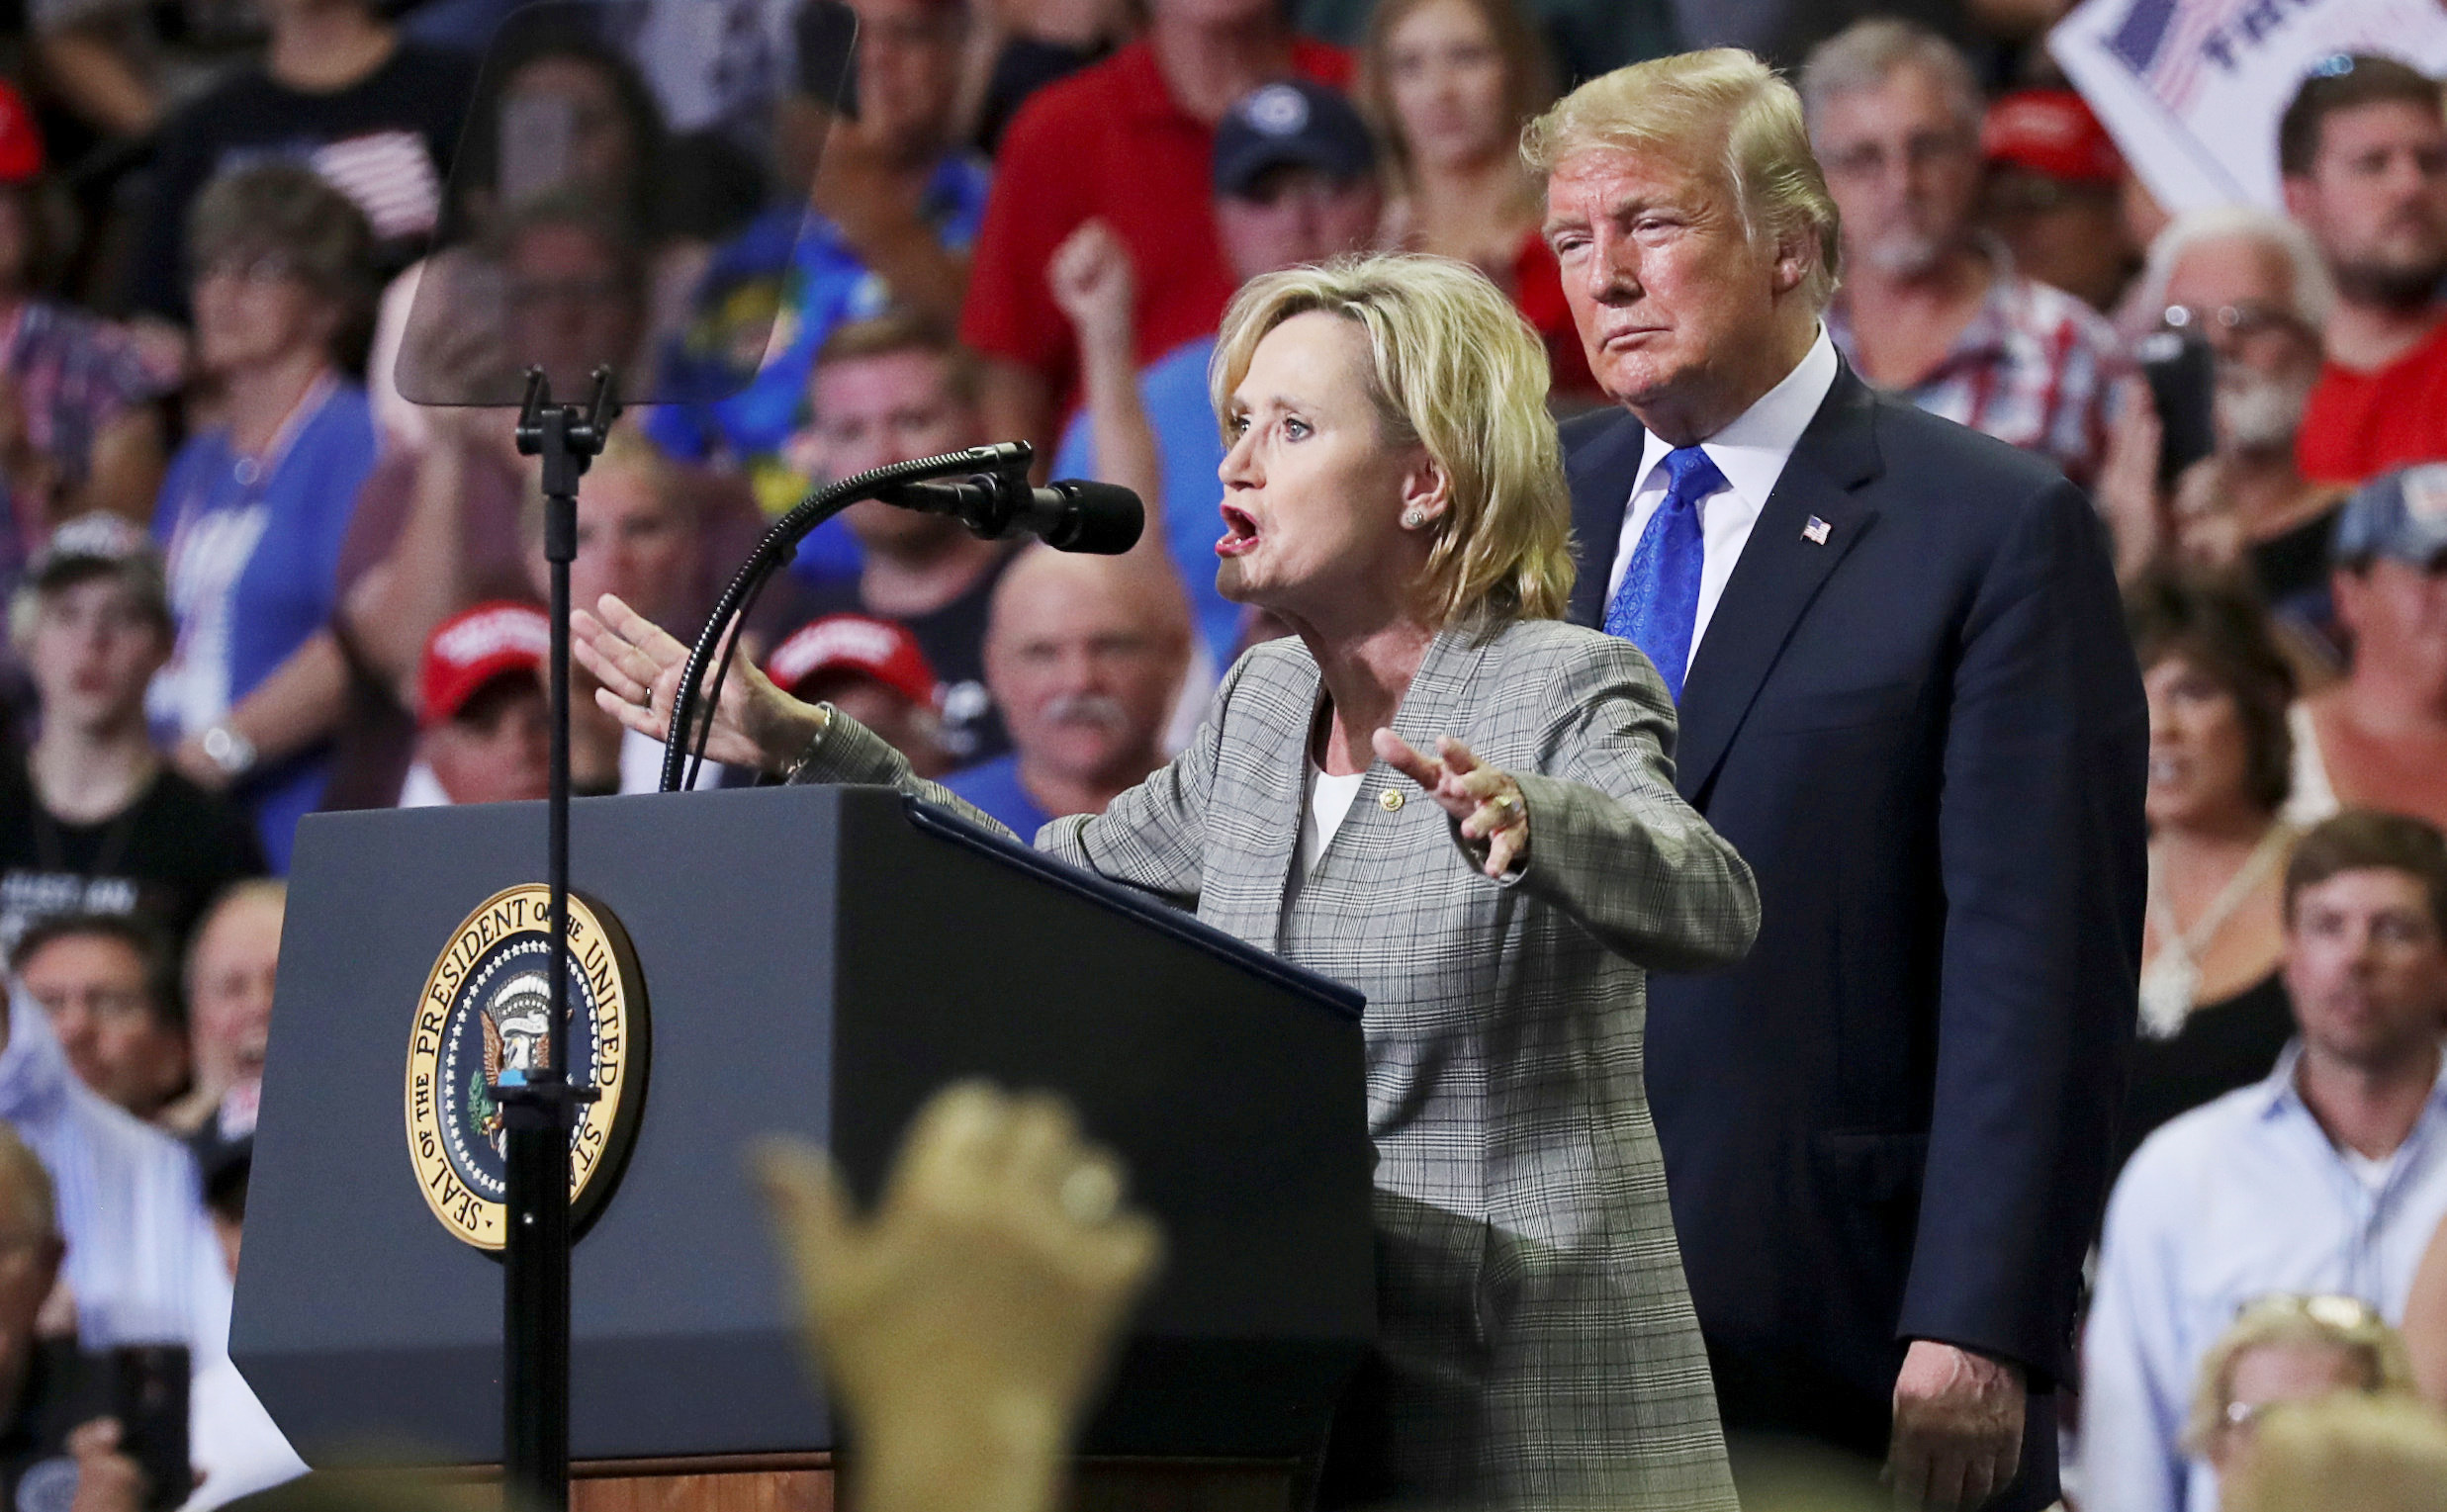 PHOTO: Senator Cindy Hyde-Smith joins President Donald Trump onstage at a campaign rally in Southaven, Miss., Oct. 2, 2018.